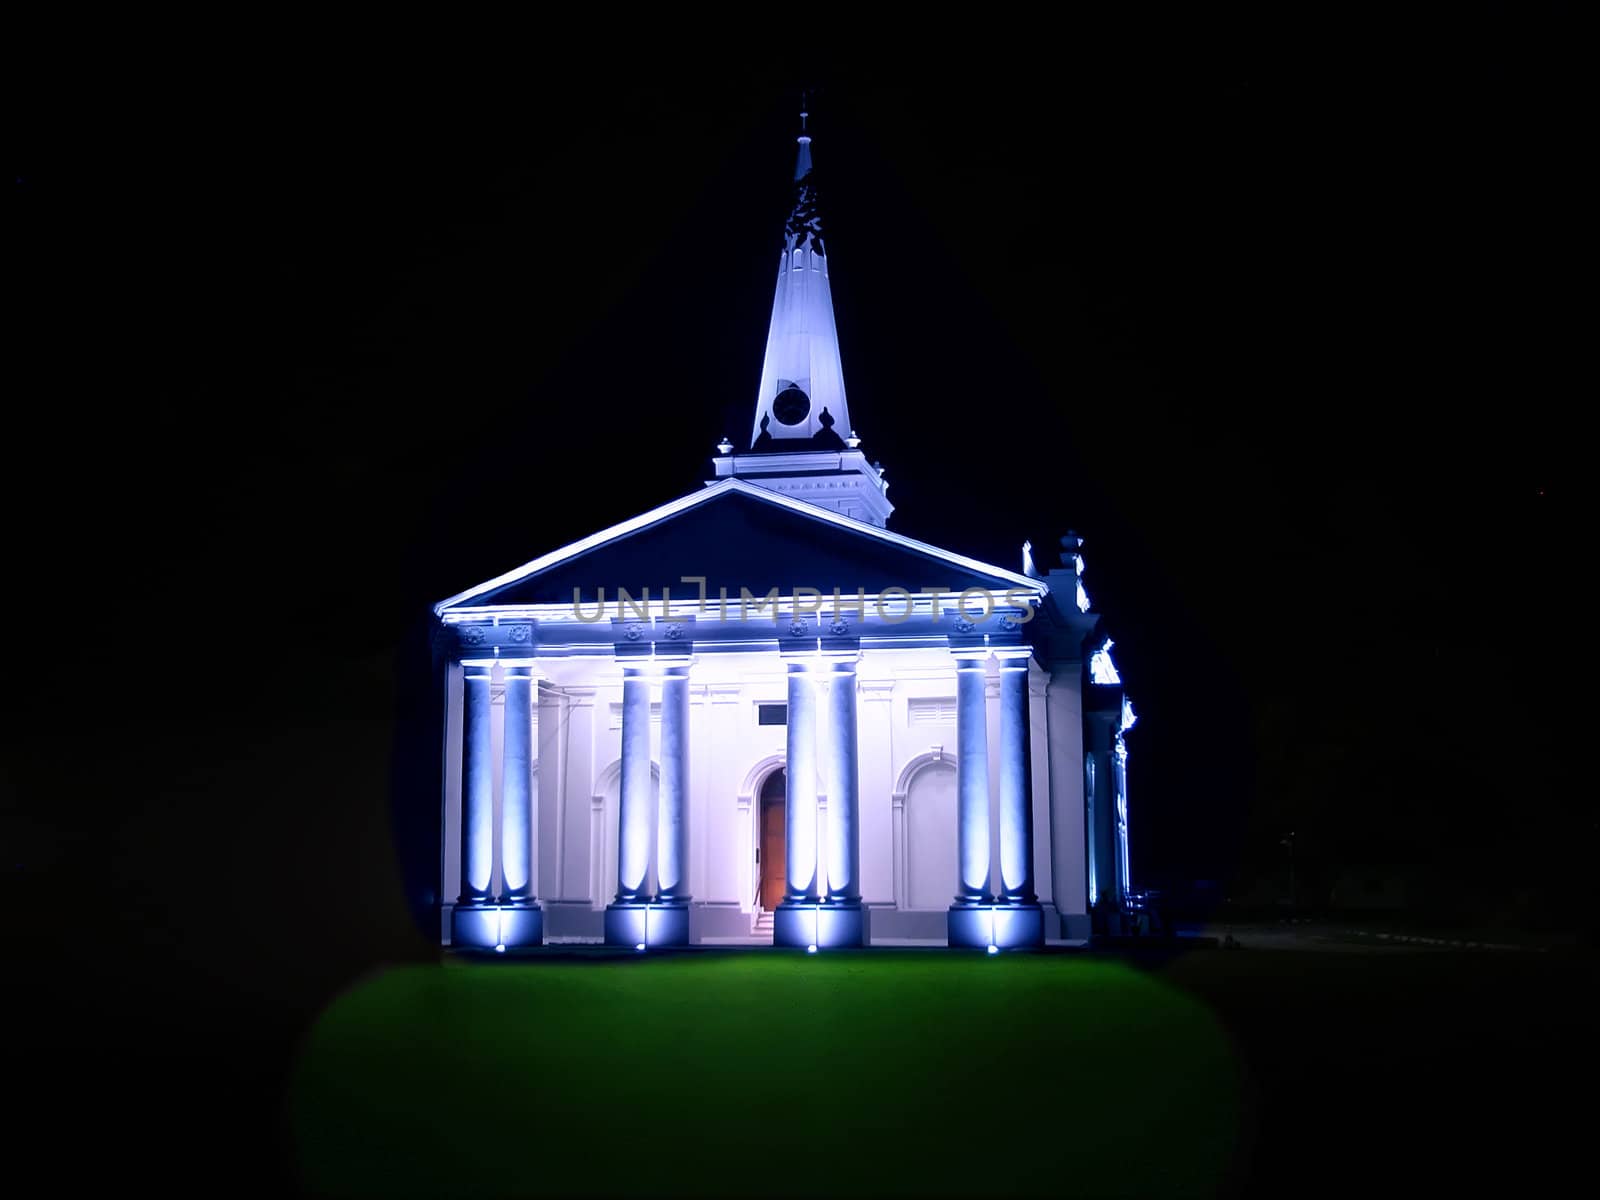 St. George's Church at night. by GNNick